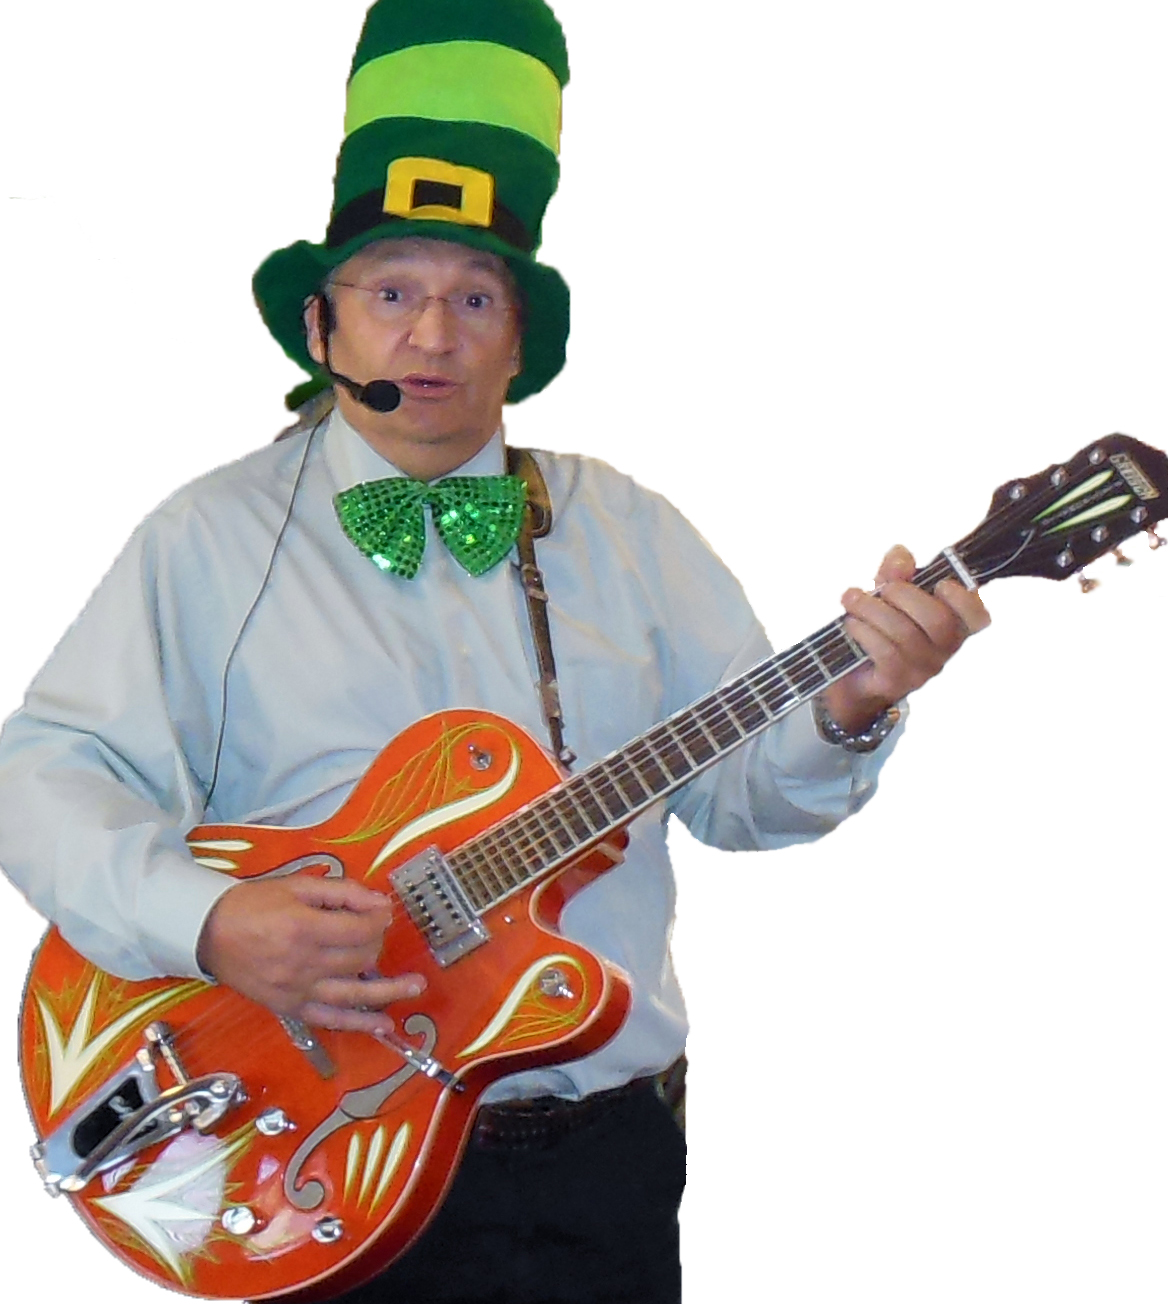 Roger Chartier plays a Gretsch on St Patty's Day